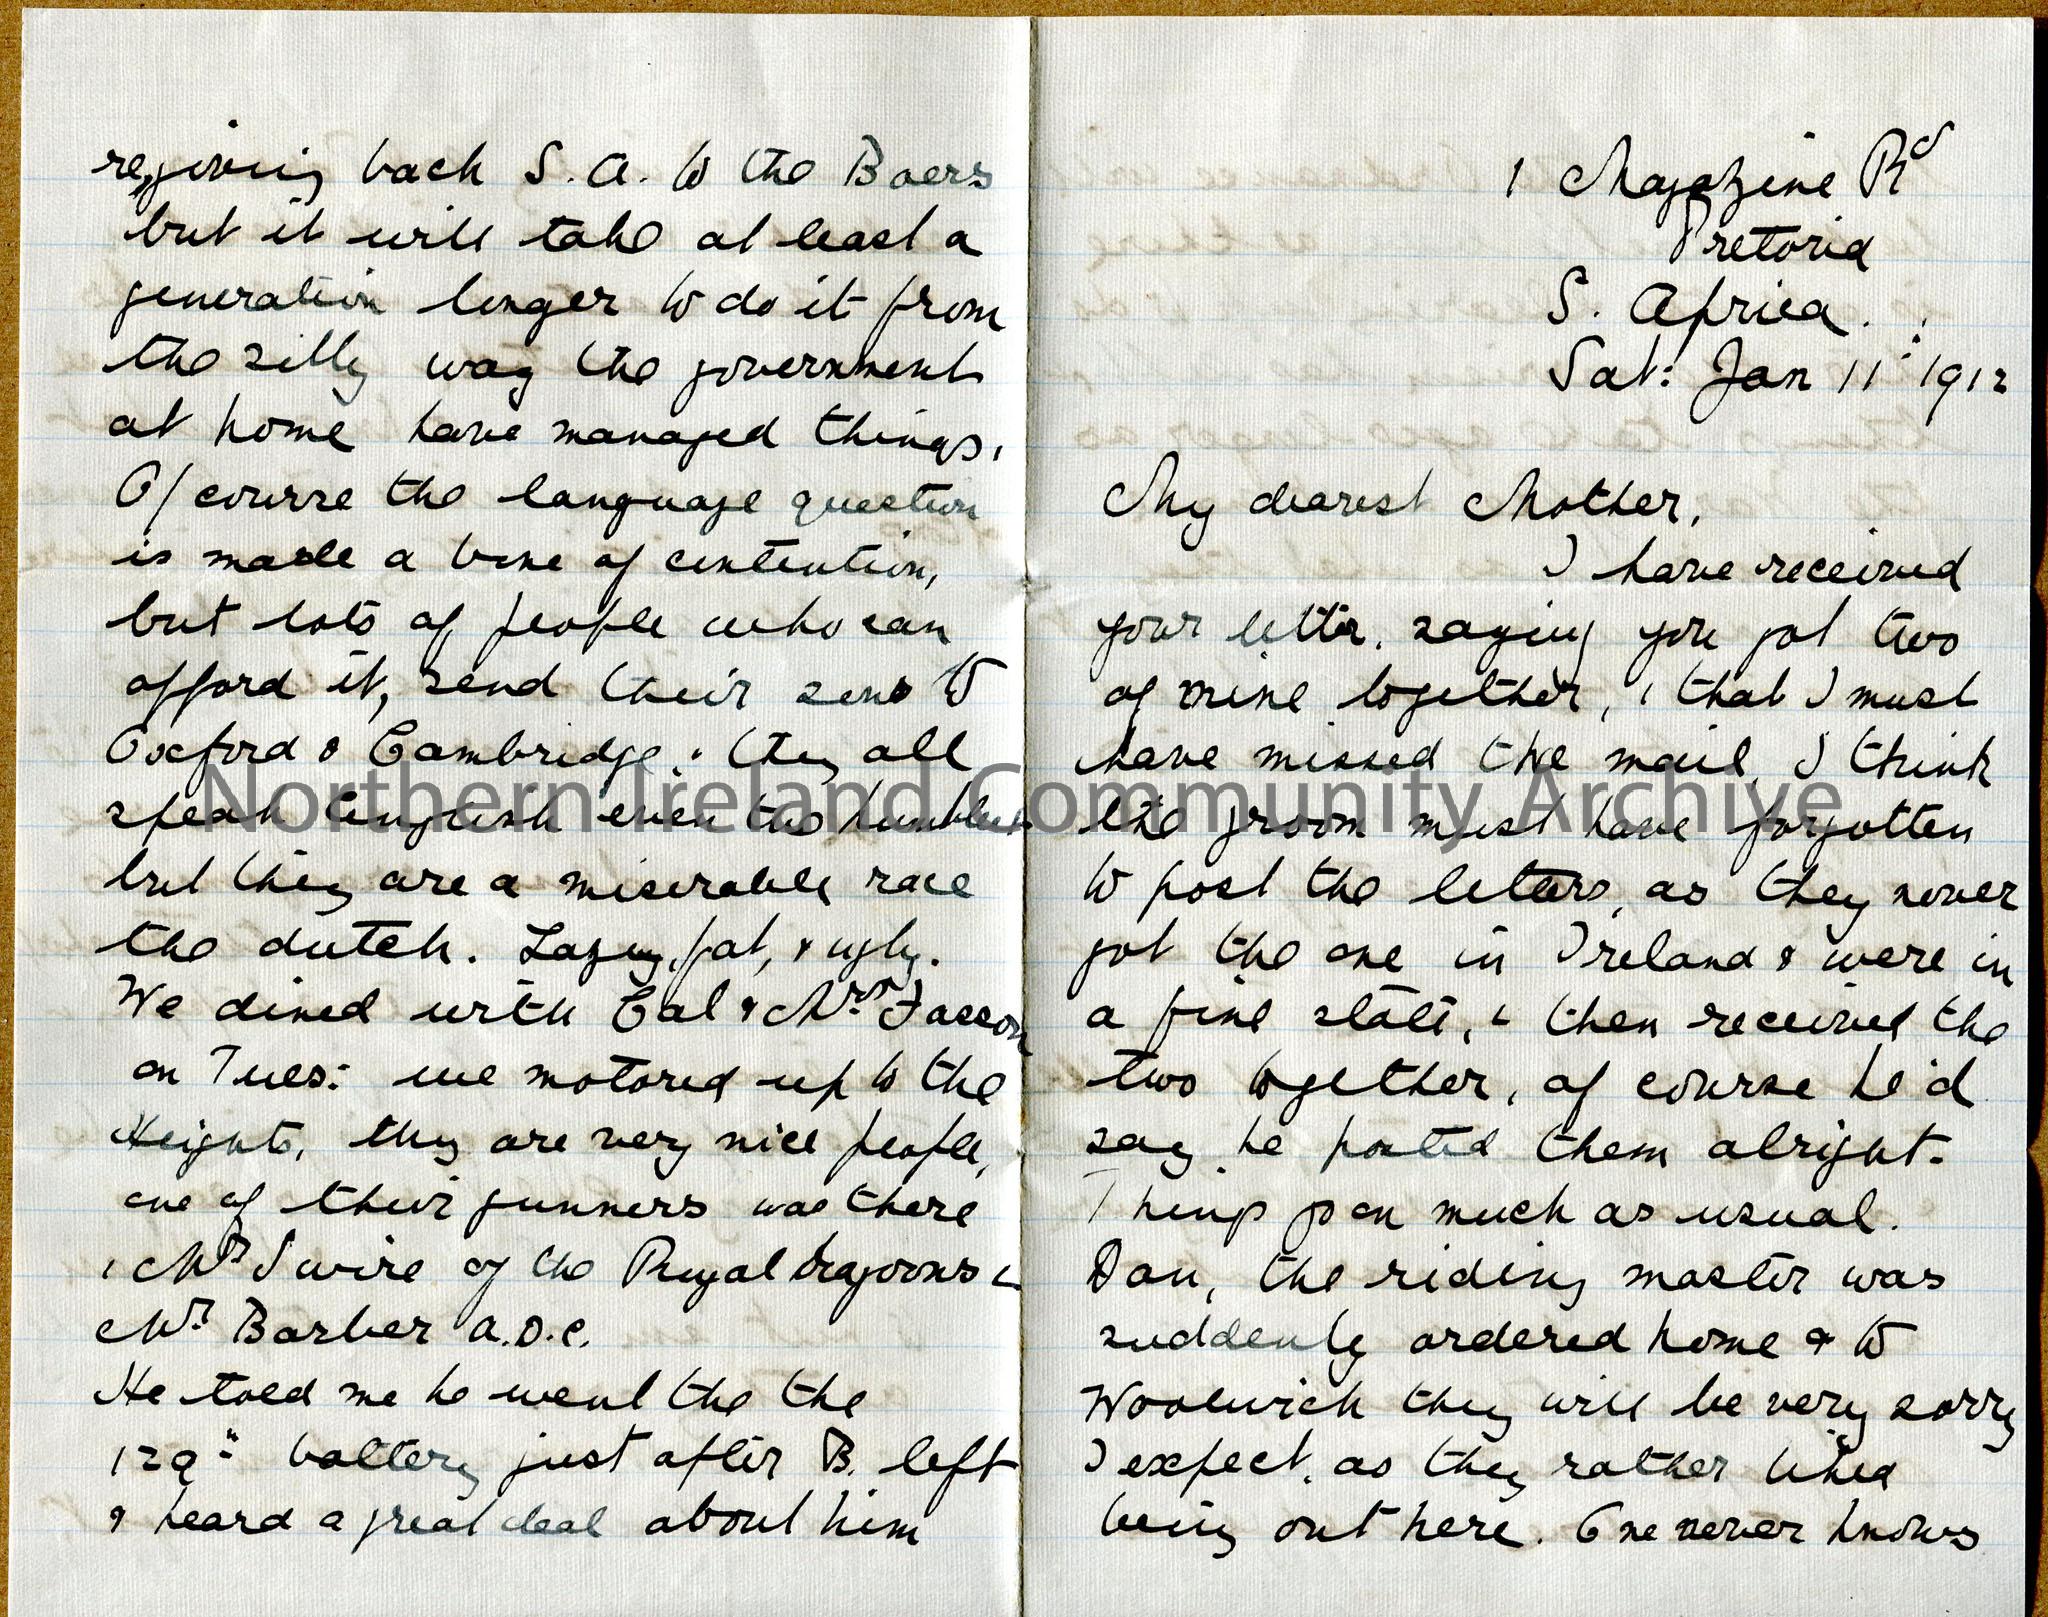 One of 2 double pages of handwritten letter from Dorothy to her mother. Discusses problems with garrison and ammunition transfer/storage, entertainmen…